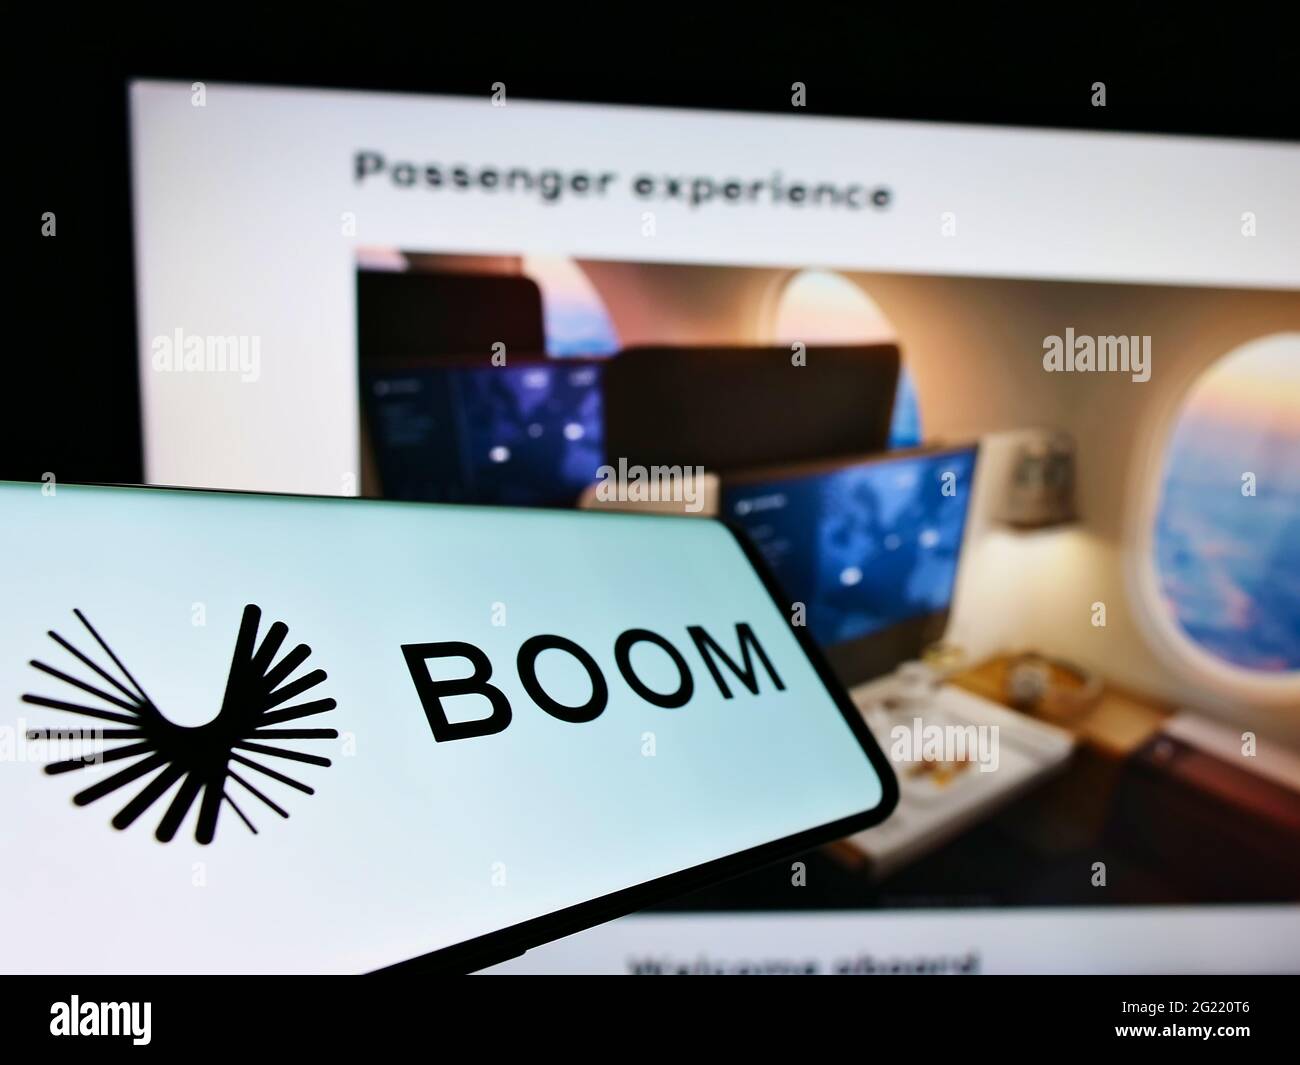 Mobile phone with logo of US aerospace company Boom Technology Inc (Supersonic) on screen in front of website. Focus on center-left of phone display. Stock Photo